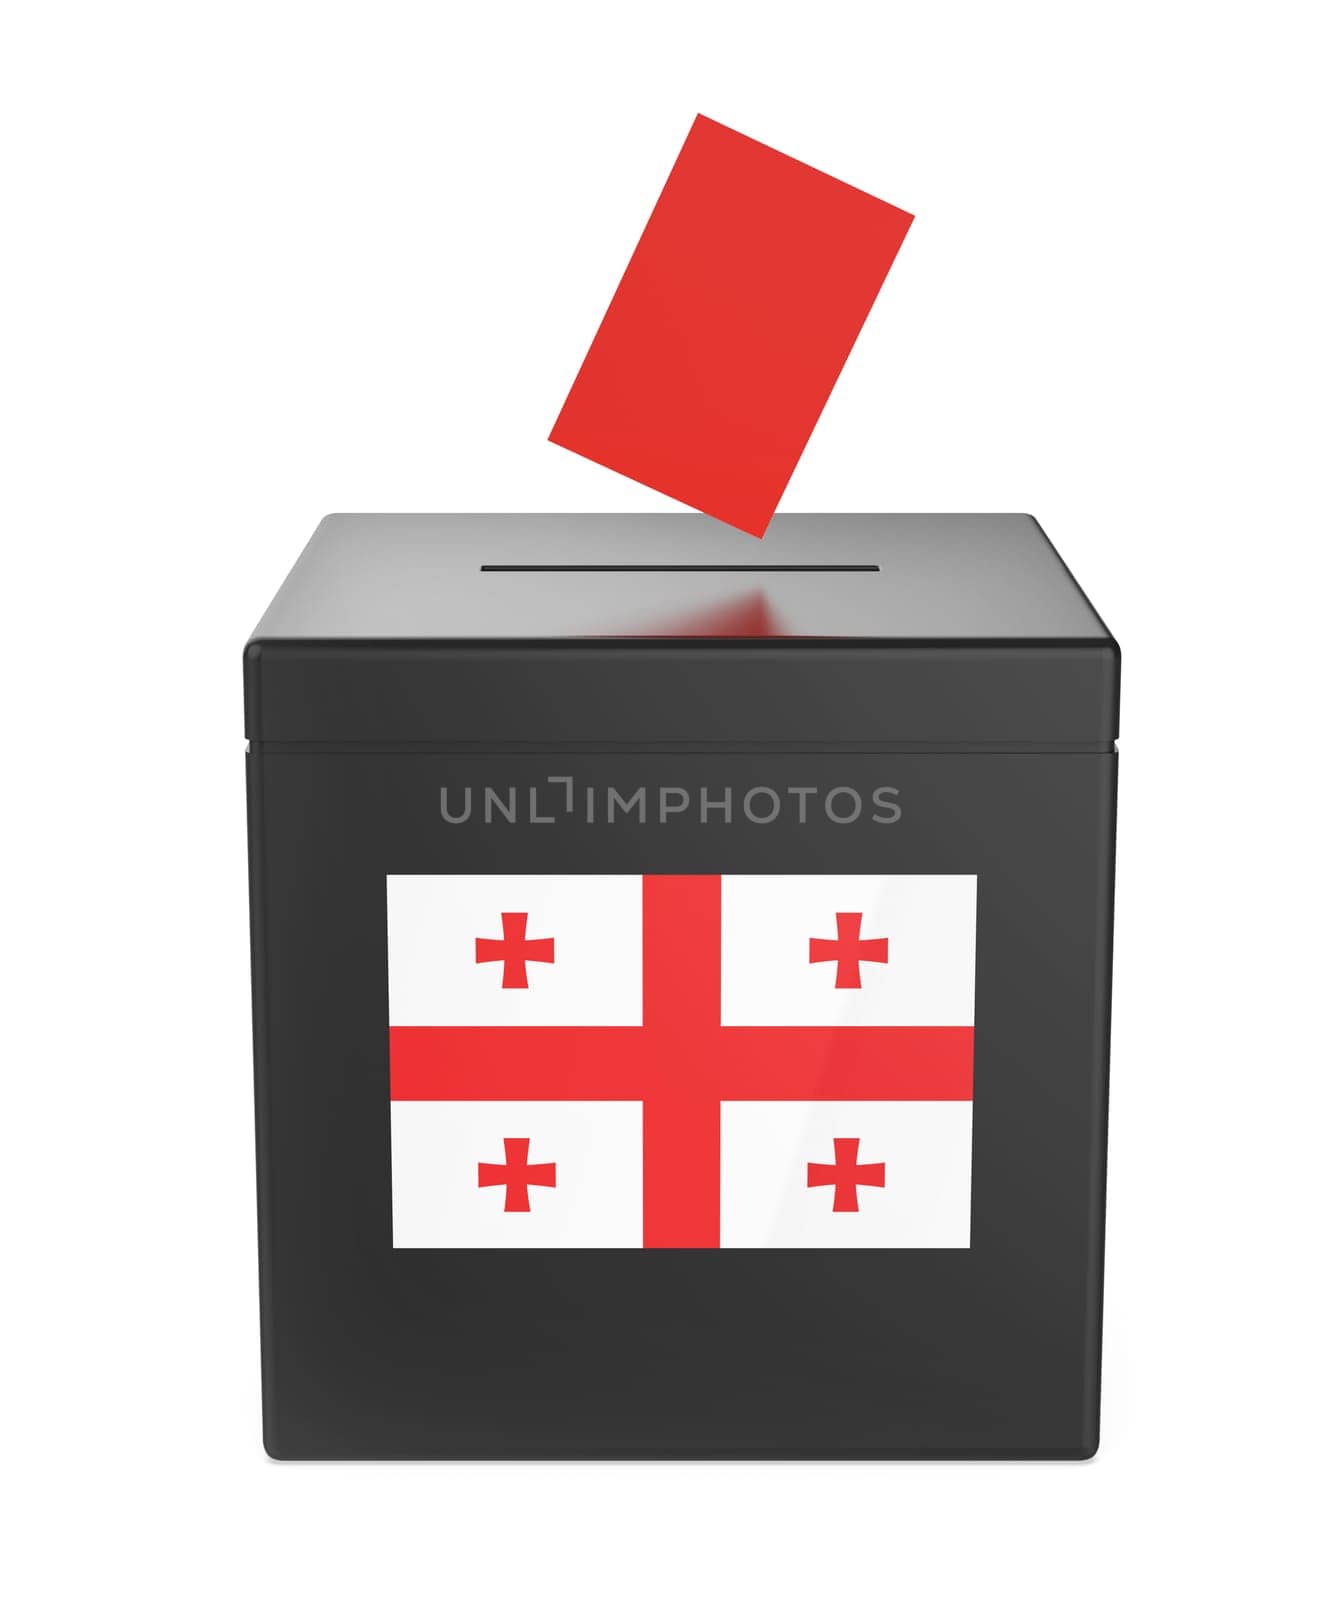 Concept image for elections in Georgia by magraphics